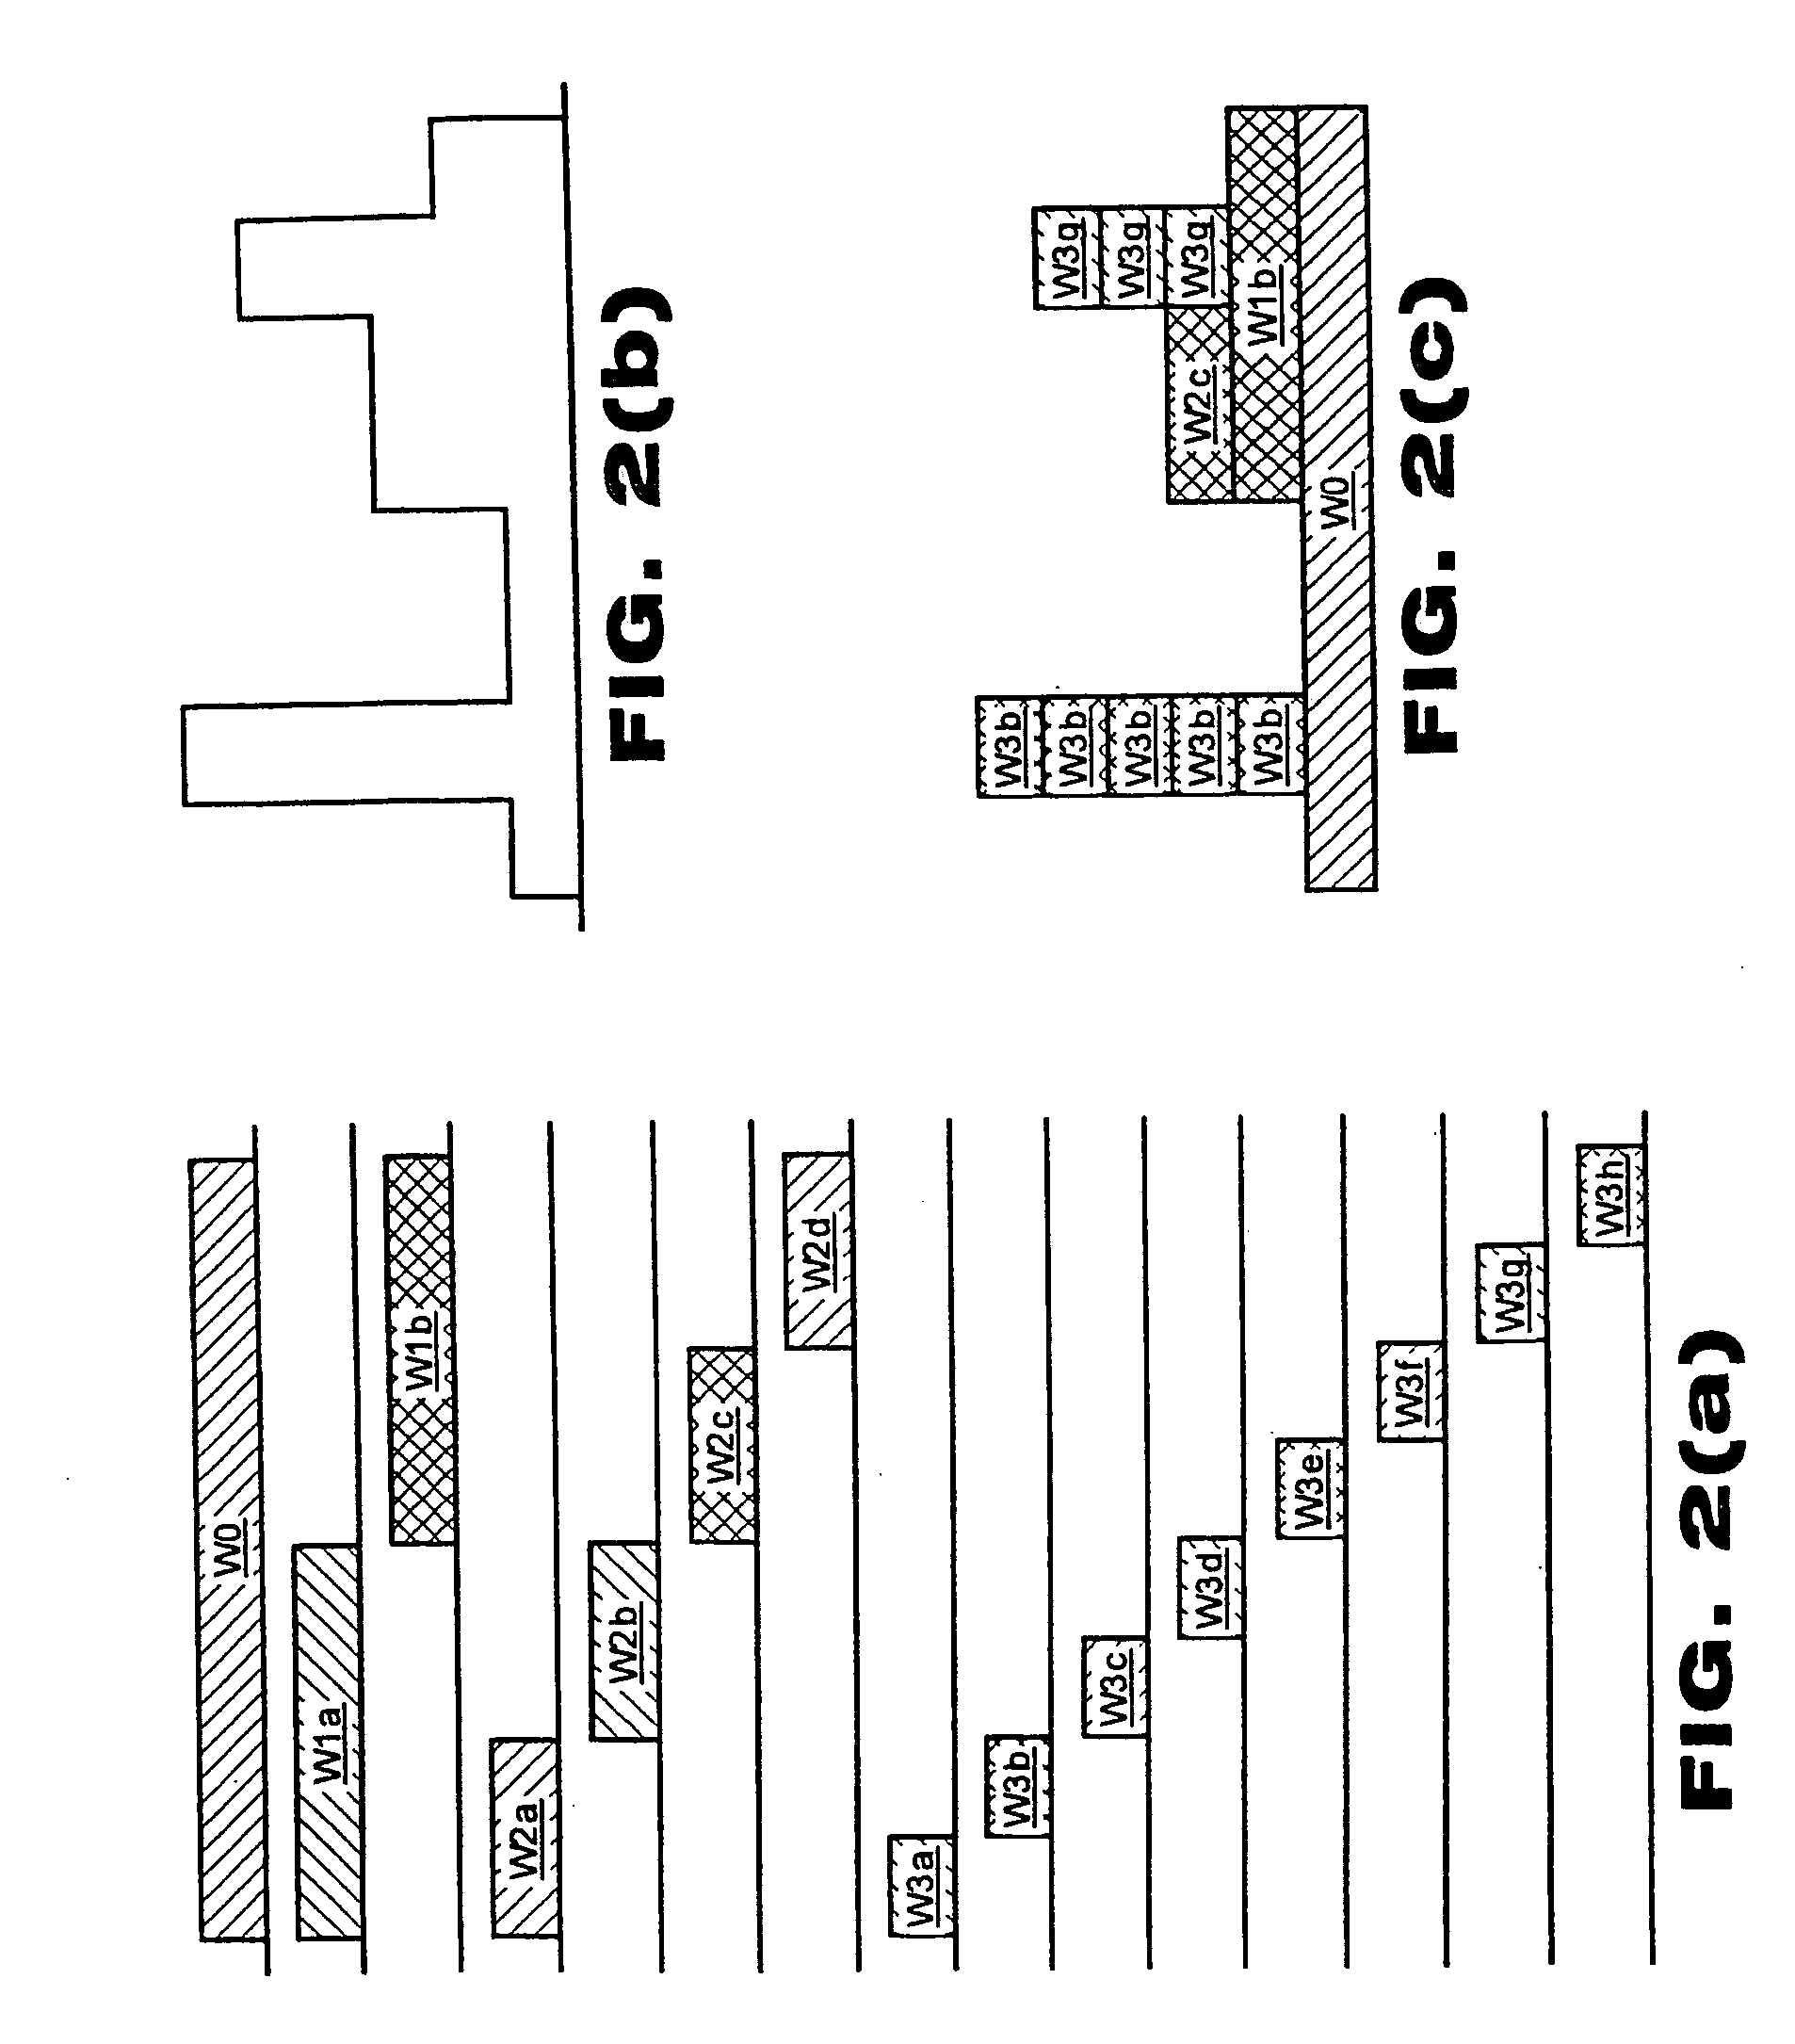 Compression of partially-masked image data